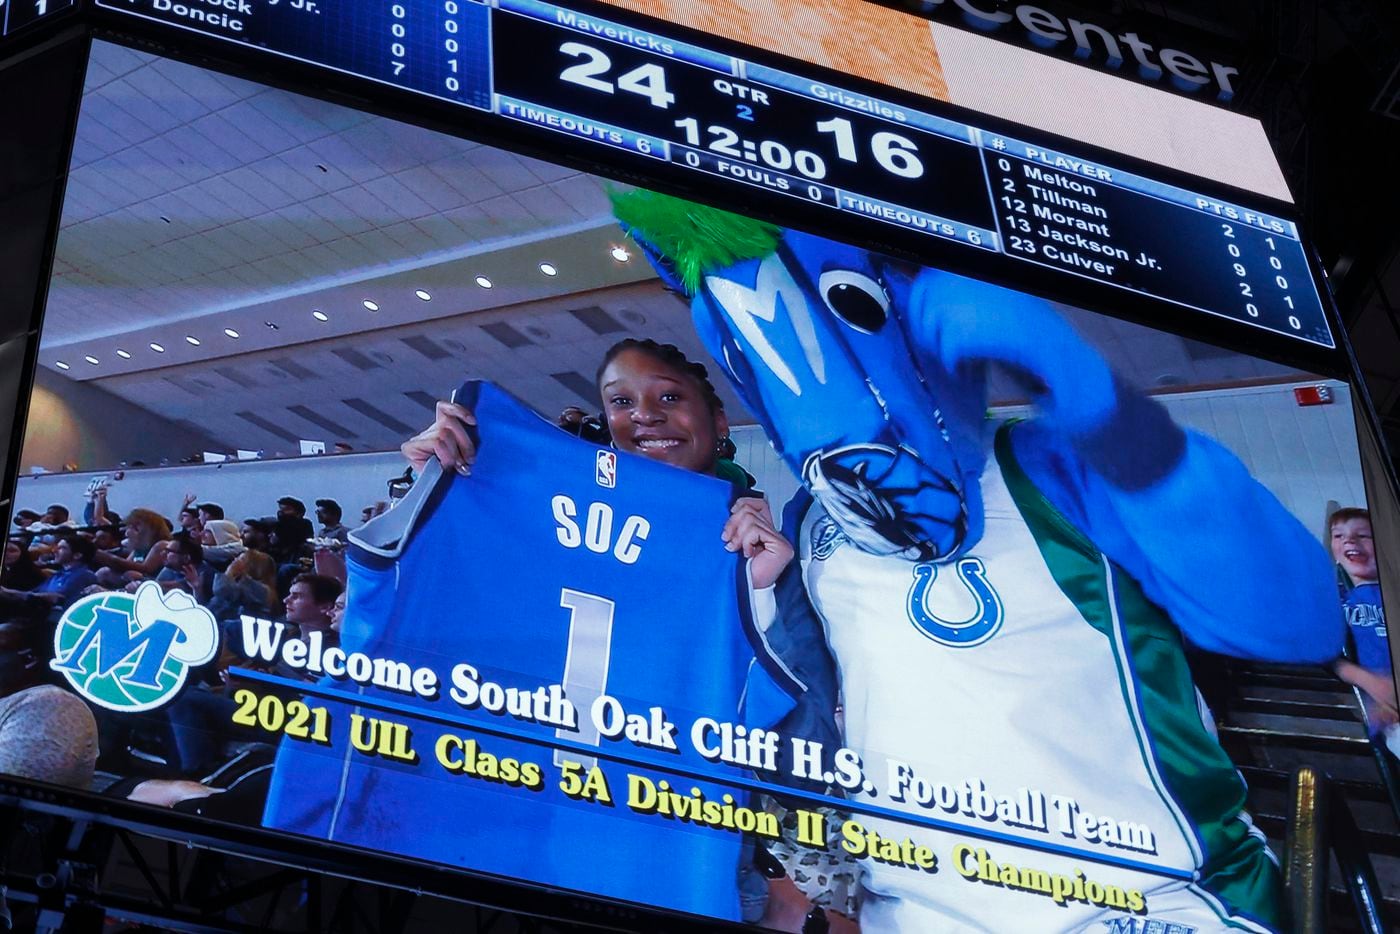 The Dallas Mavericks recognize South Oak Cliff High School and their UIL Class 5A Division...